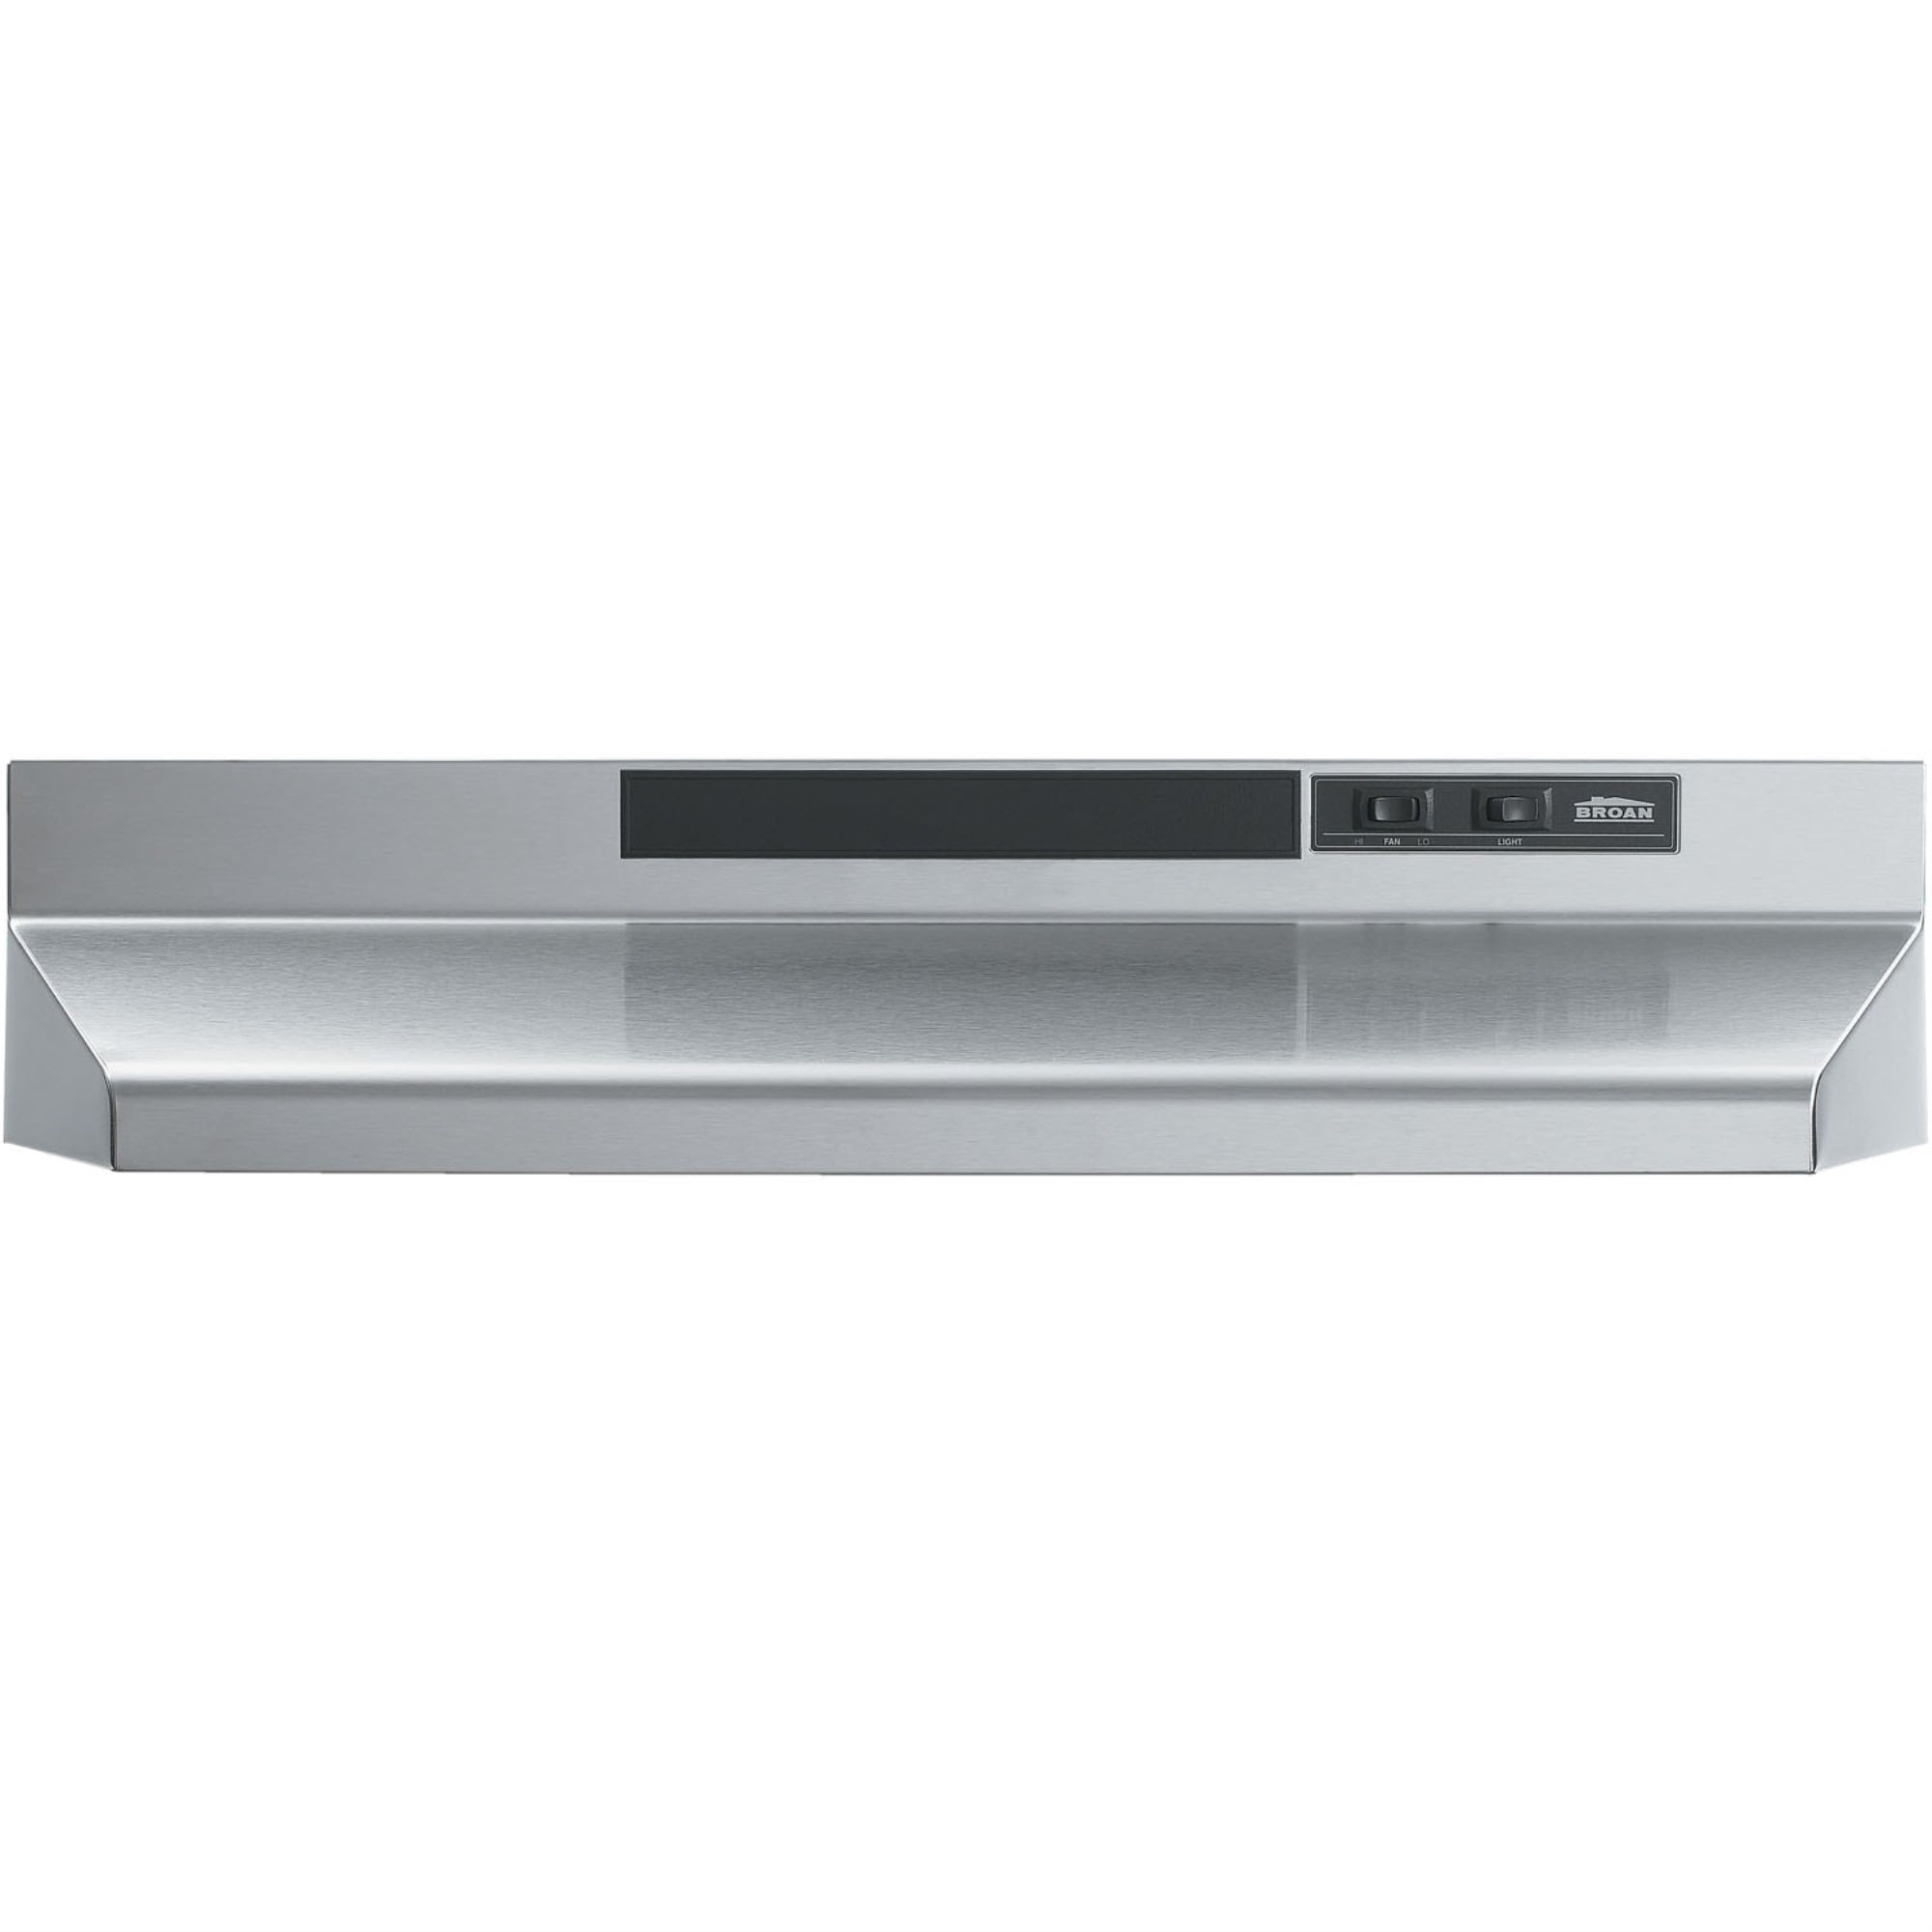 Stainle Details about   Broan-NuTone F403004 Two-Speed Four-Way Convertible Range Hood 30-Inch 